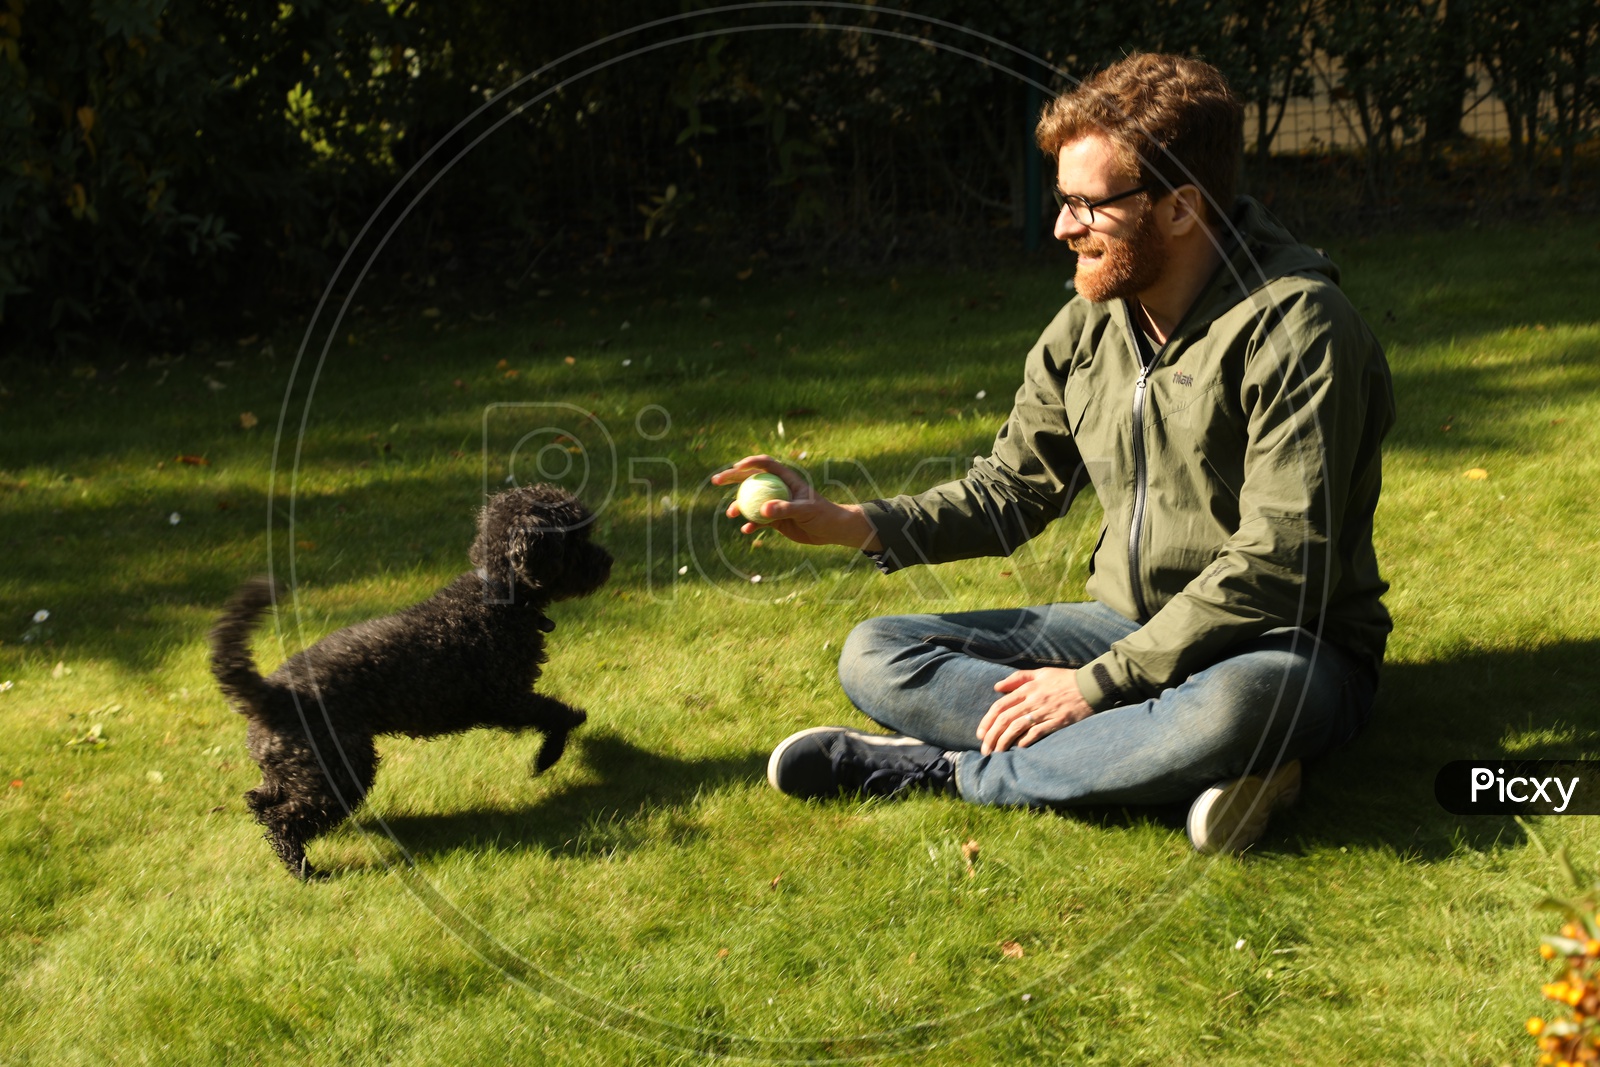 Young  Man Playing With a Pet Dog In a Lawn Garden